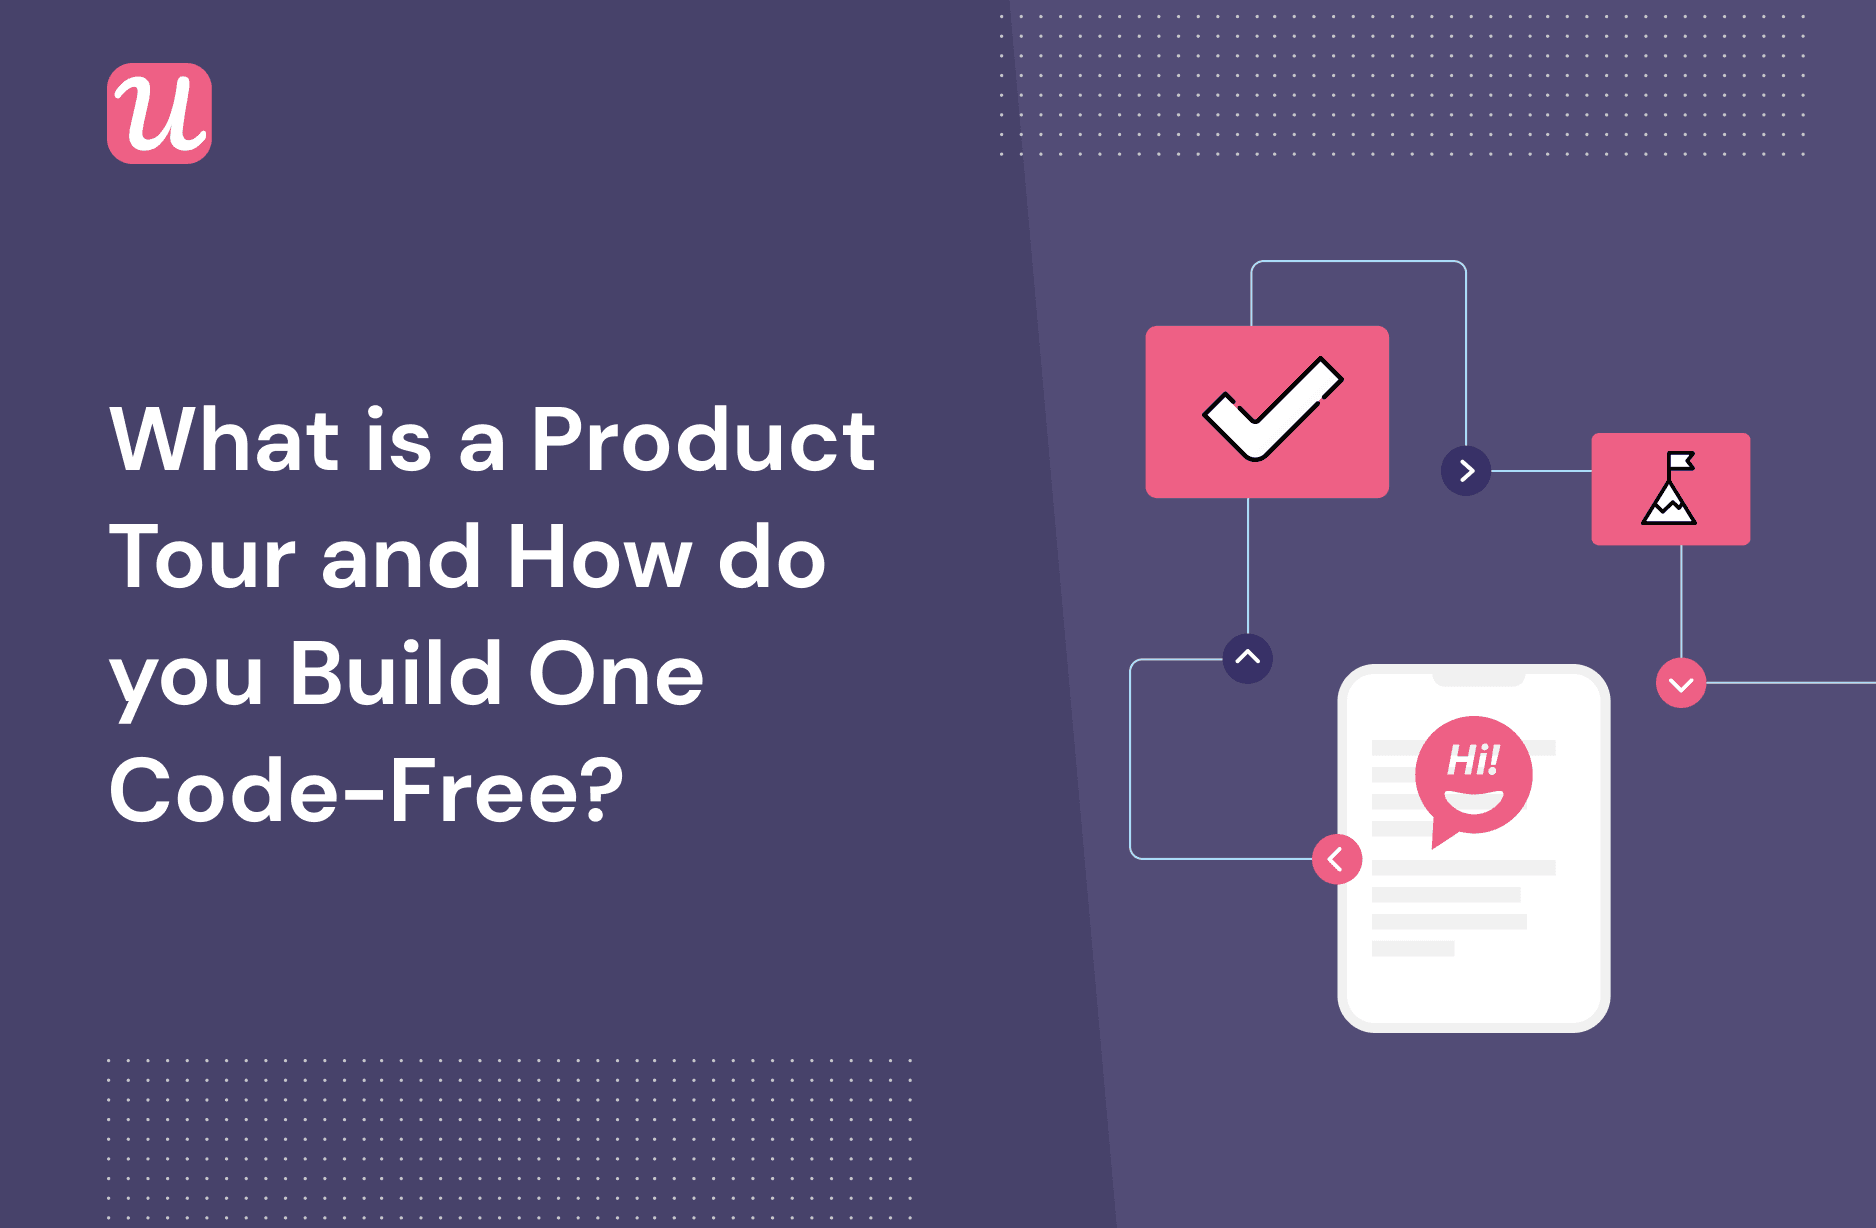 What Is A Product Tour And How Do You Build One Code-Free?